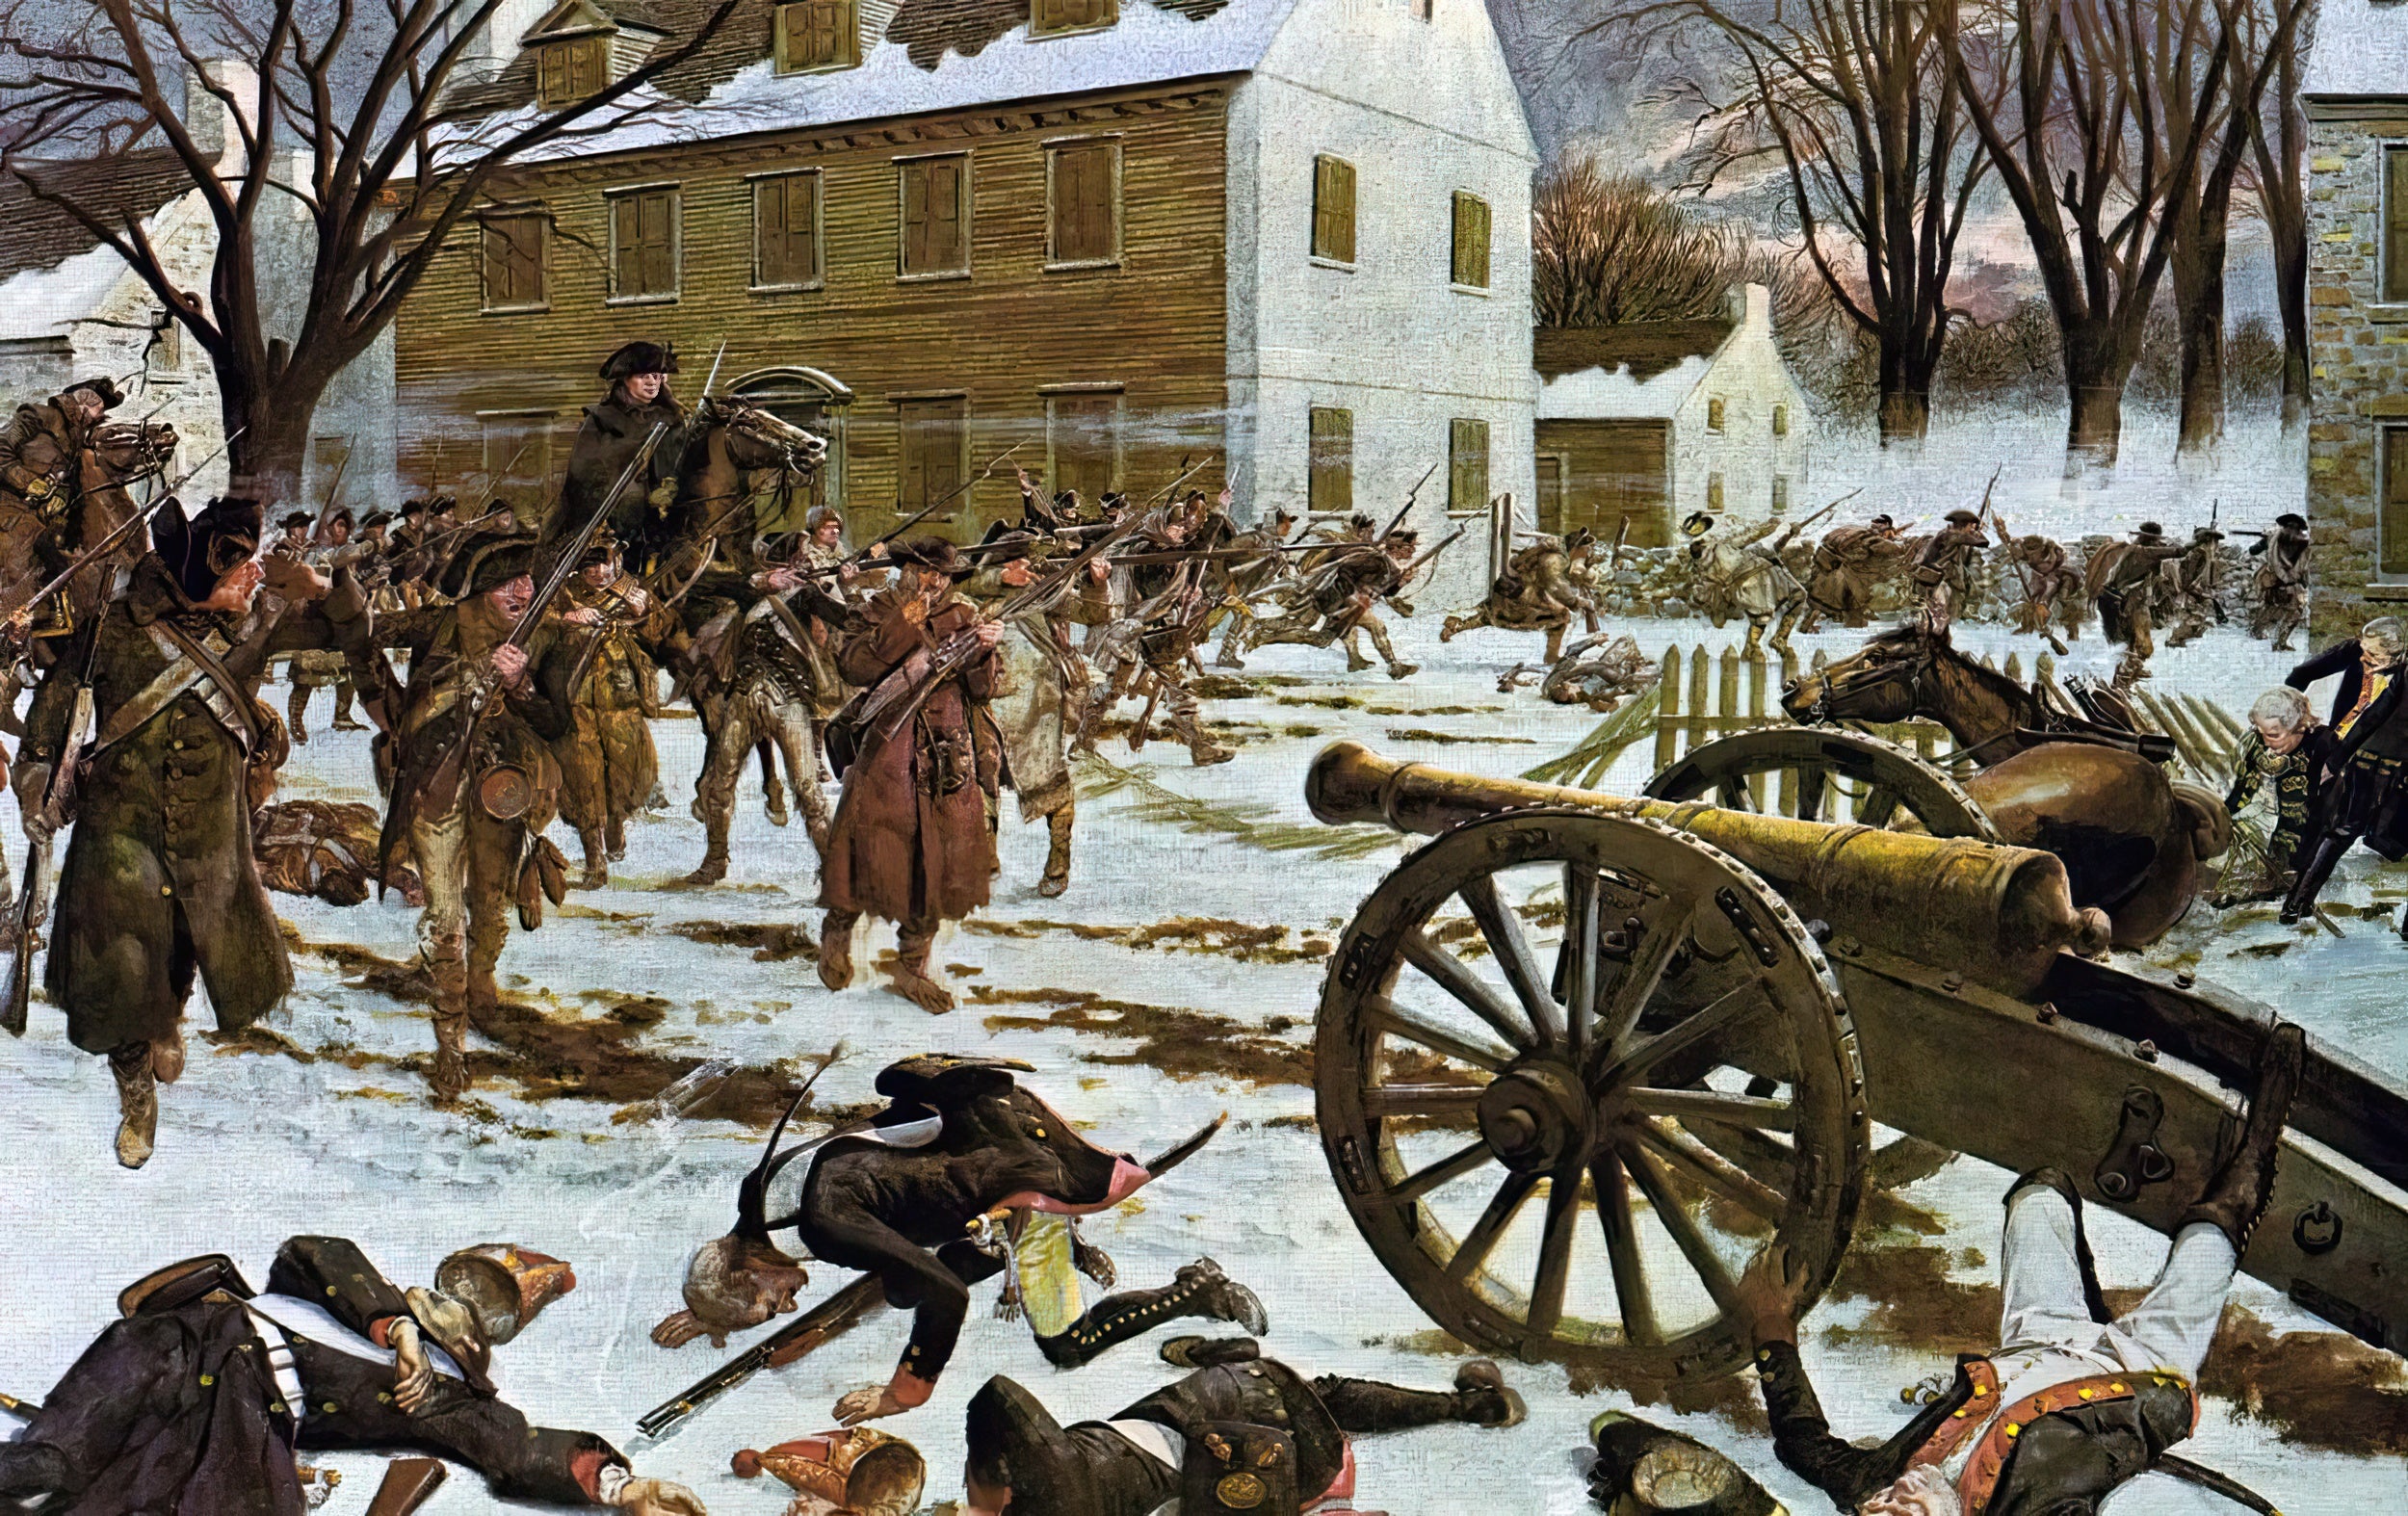 The Battle of Trenton - Painting depicting the battle